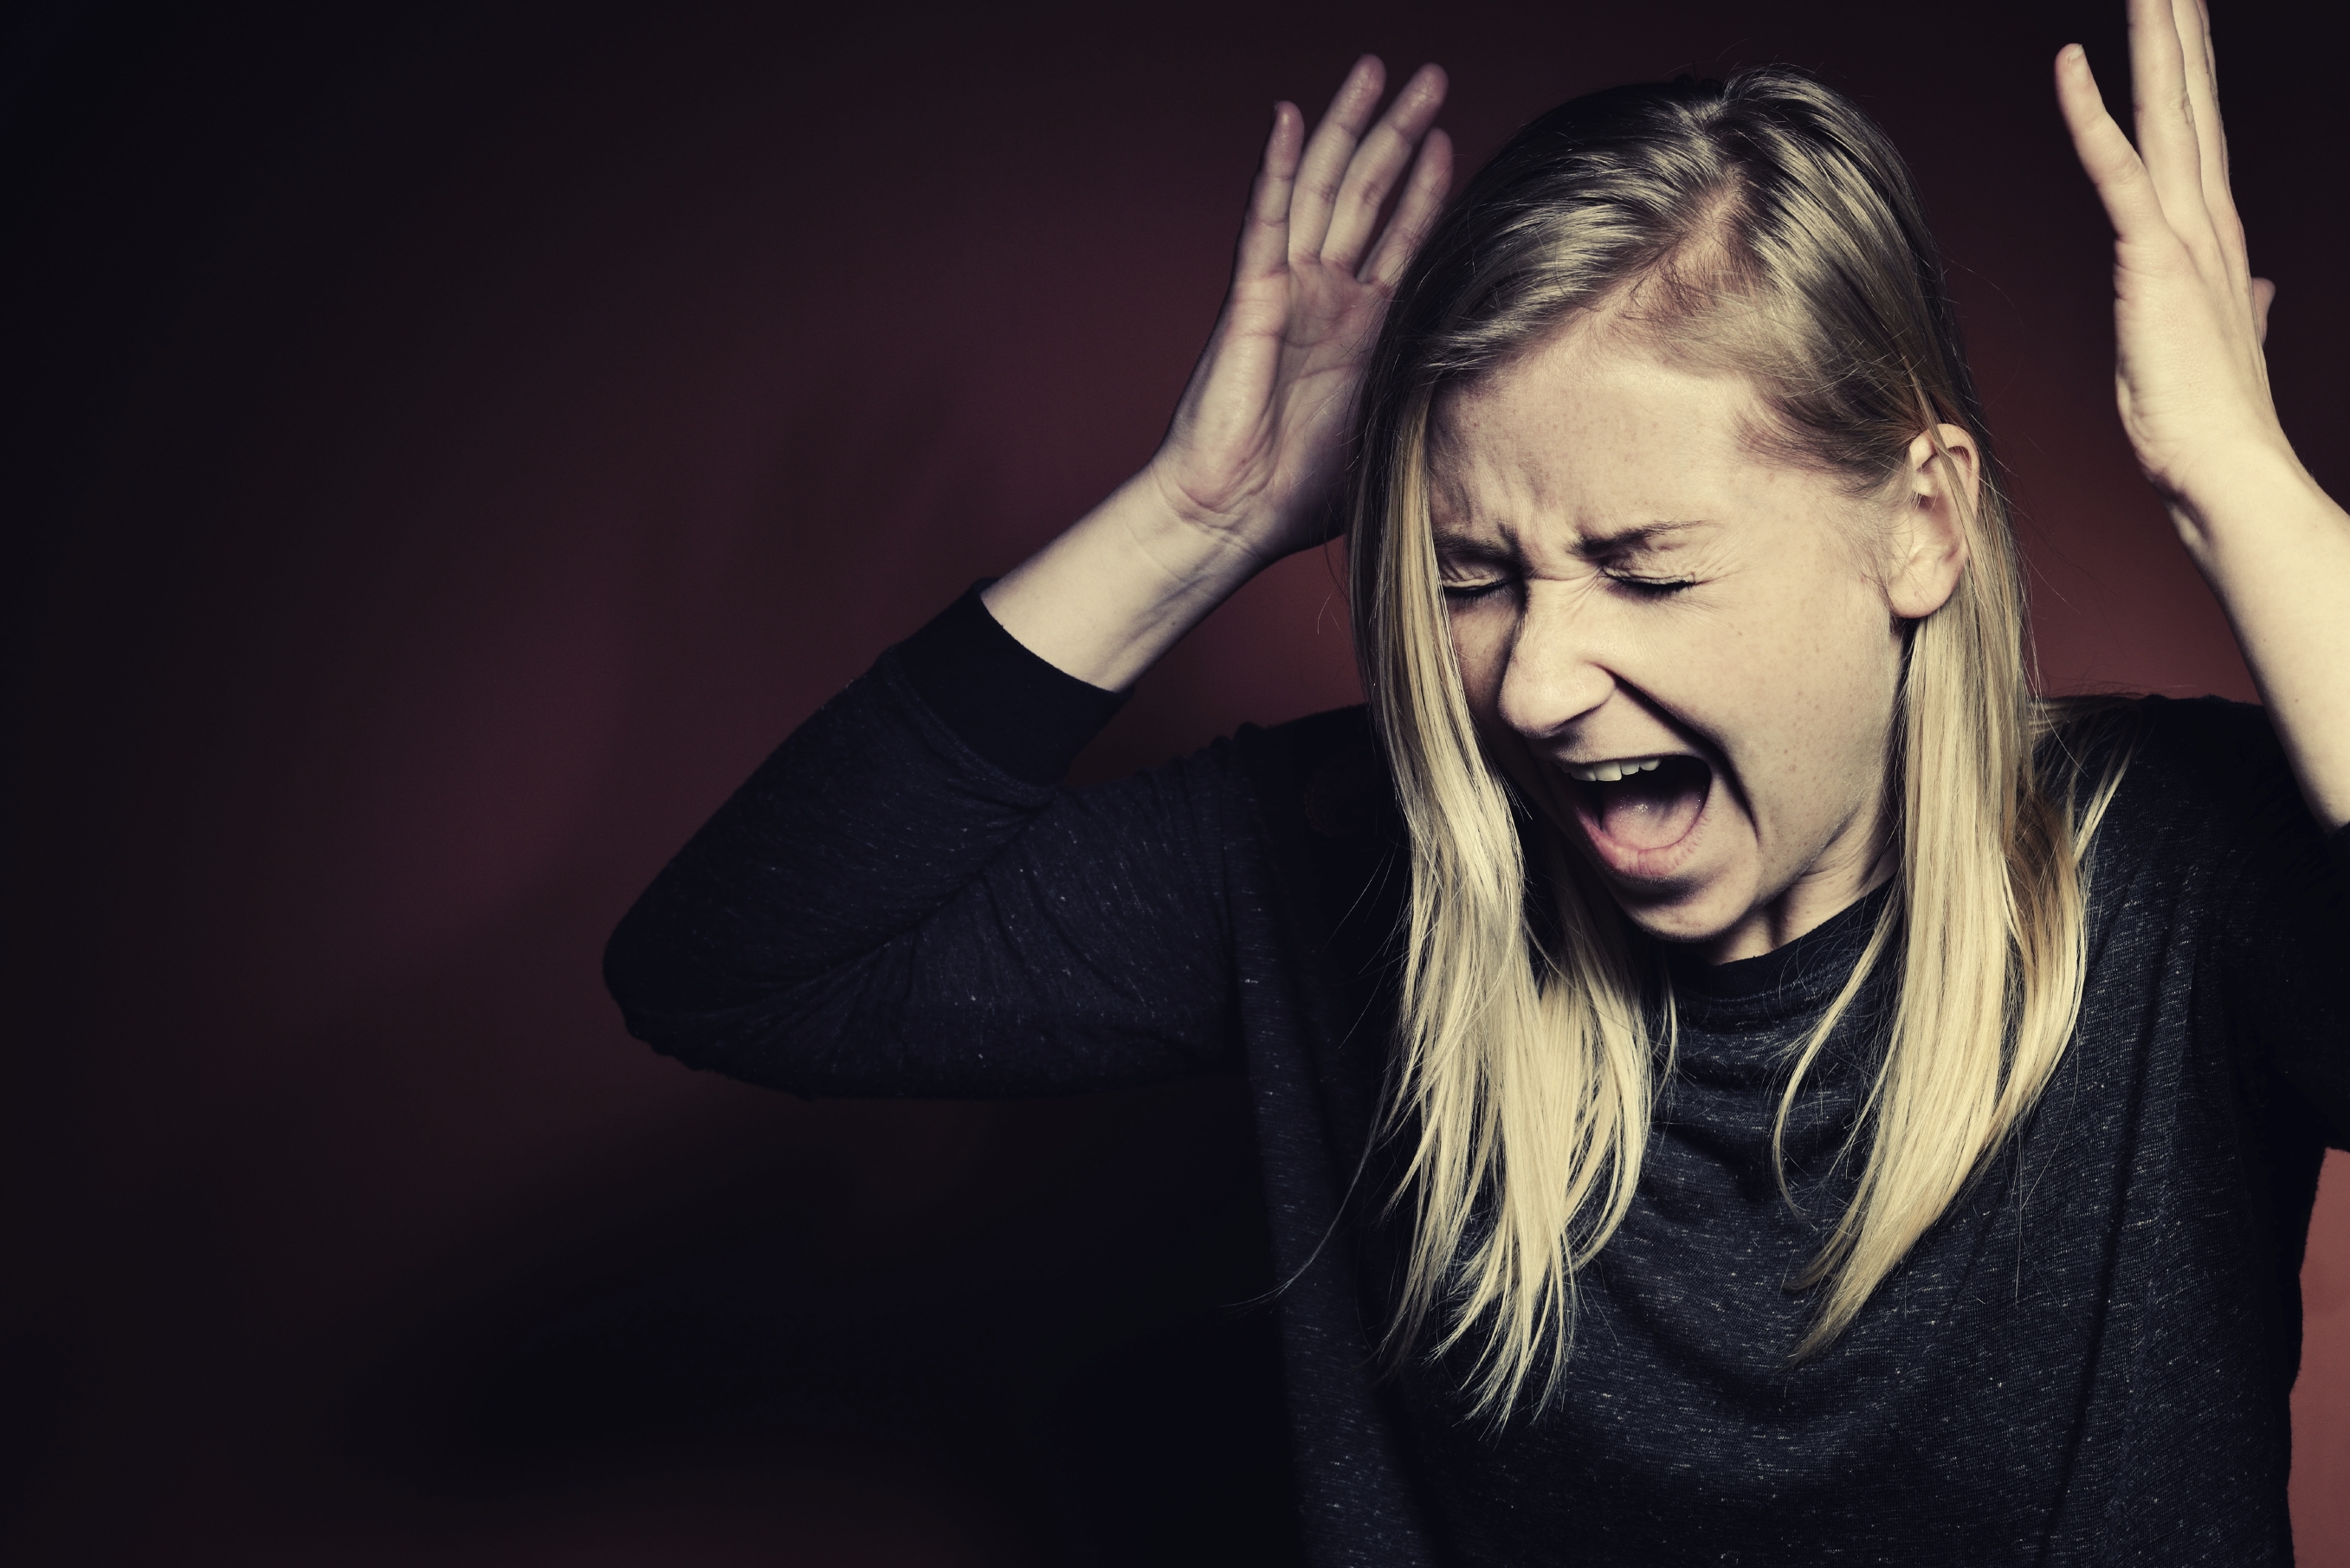 How can I calm my uncontrollable anger?